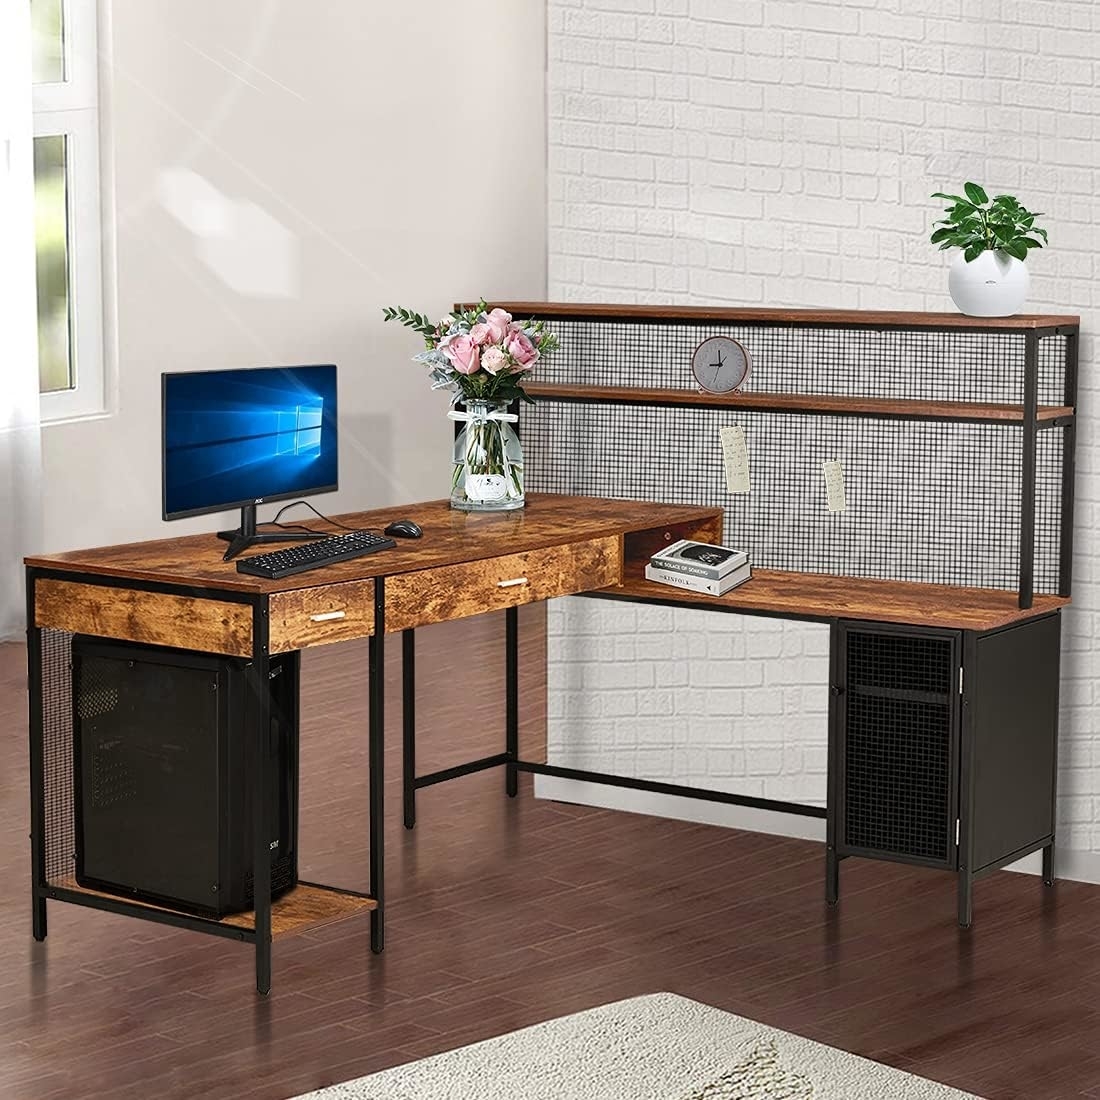 the black and wood desk